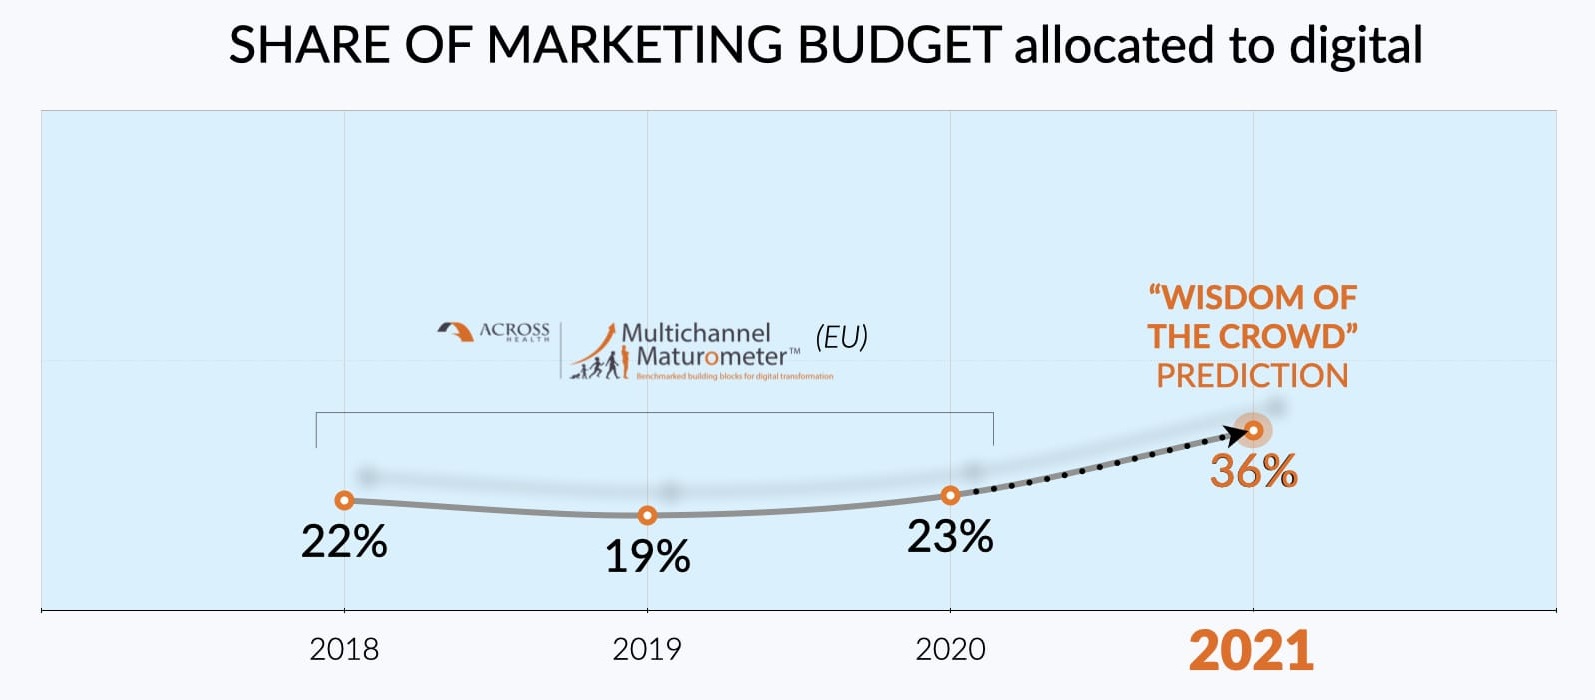 Share of marketing budget allocated to digital activities in 2021